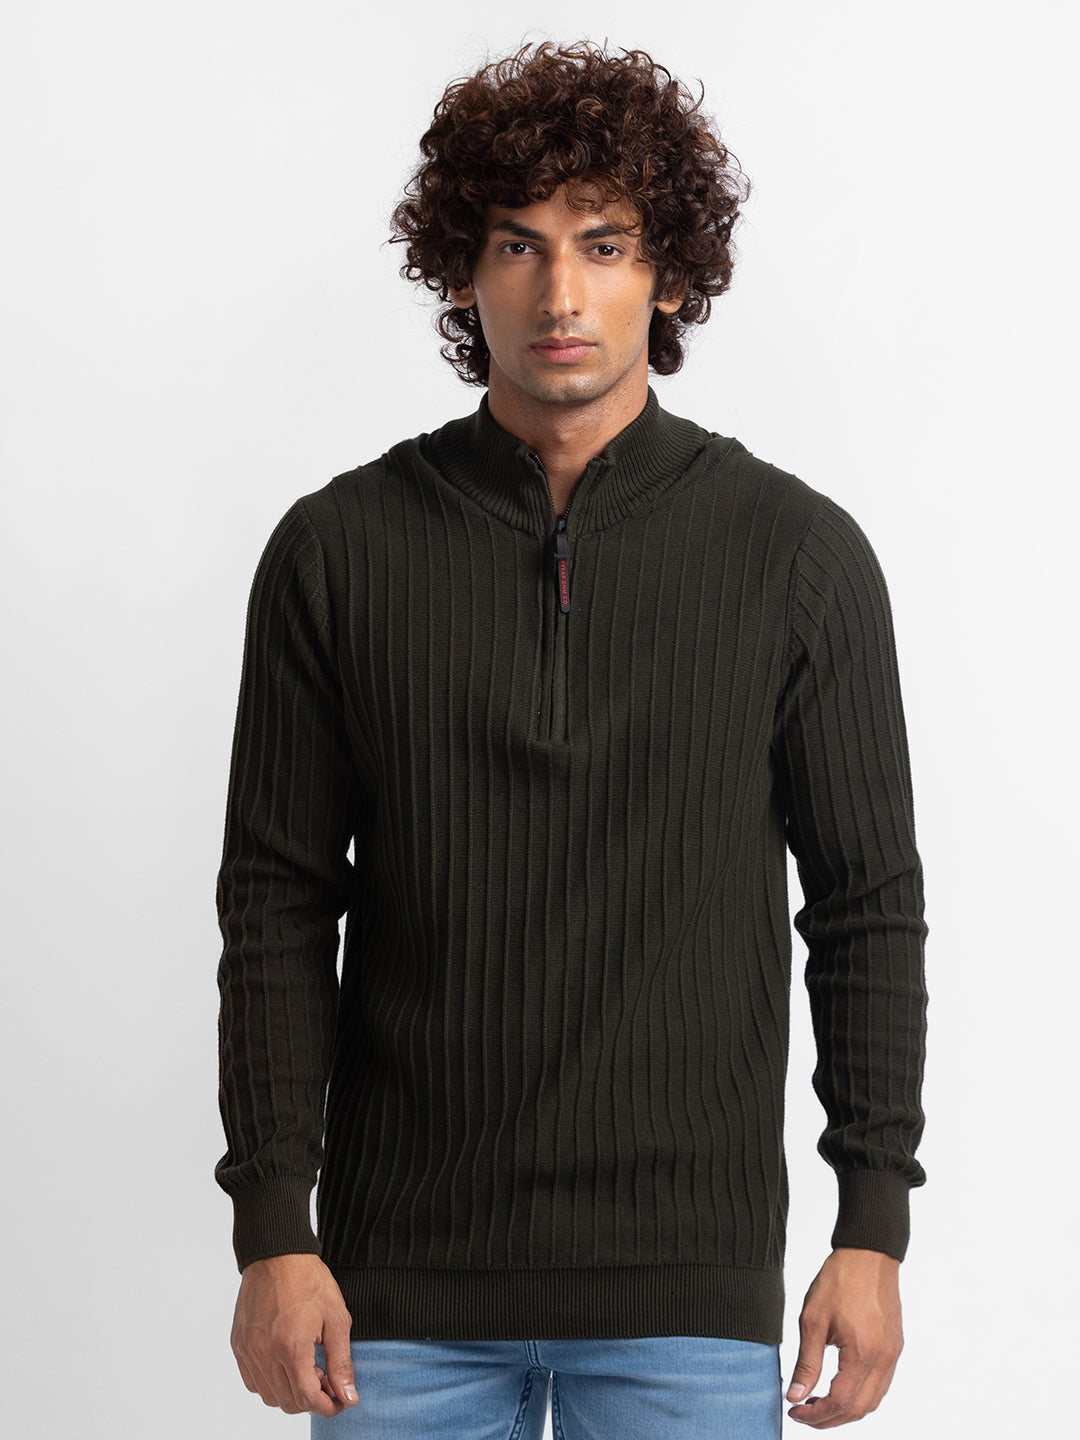 Spykar Olive Green Cotton Full Sleeve Casual Sweater For Men